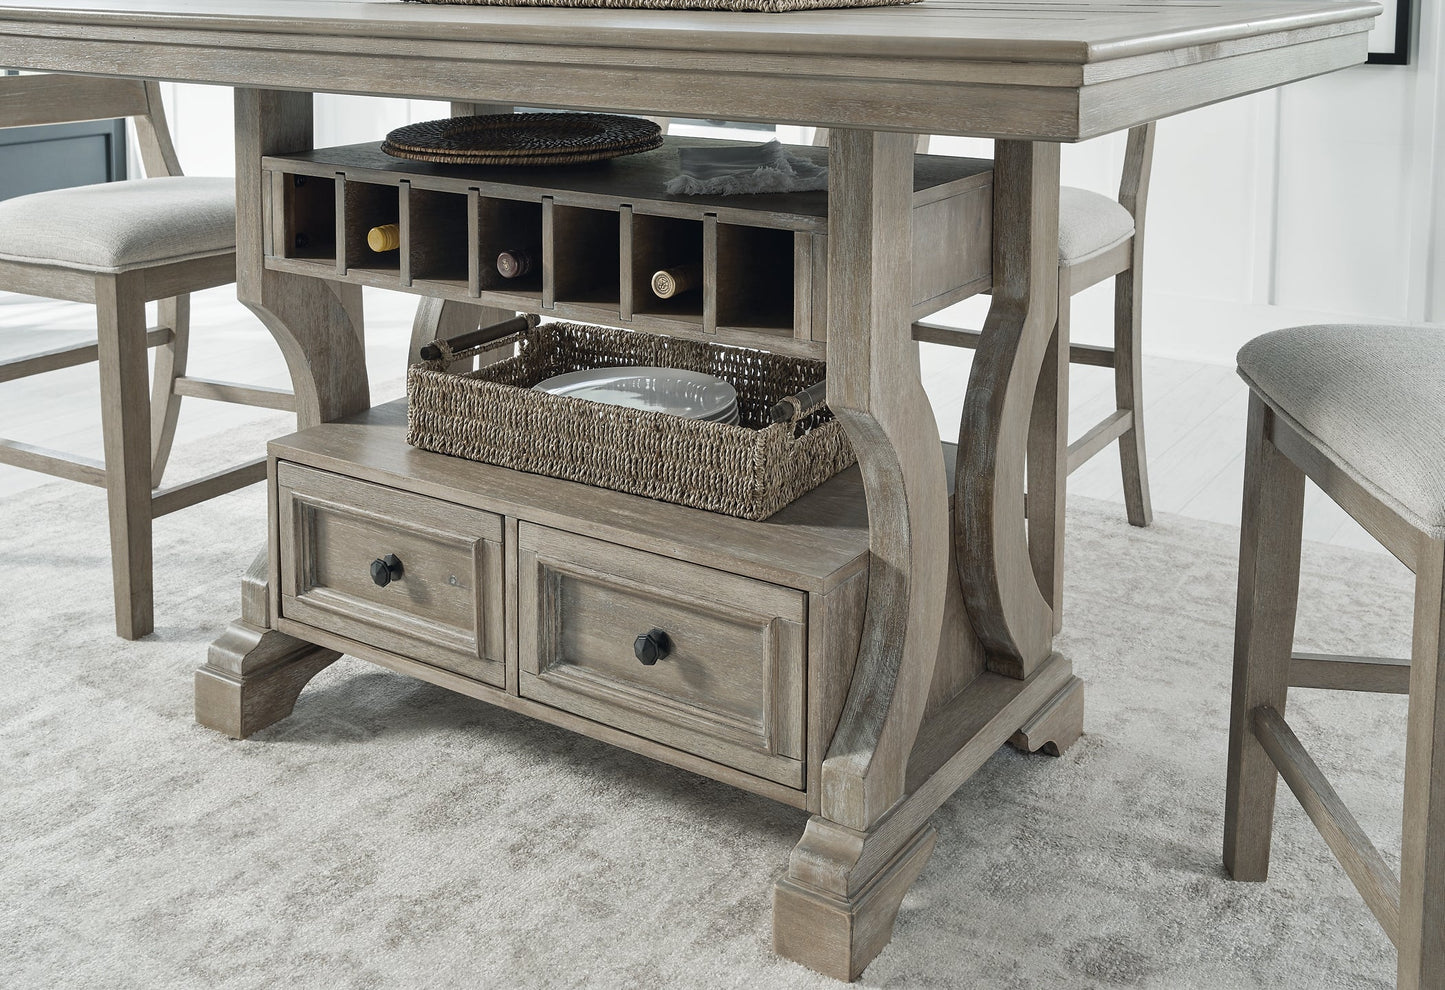 Moreshire RECT Dining Room Counter Table Smyrna Furniture Outlet